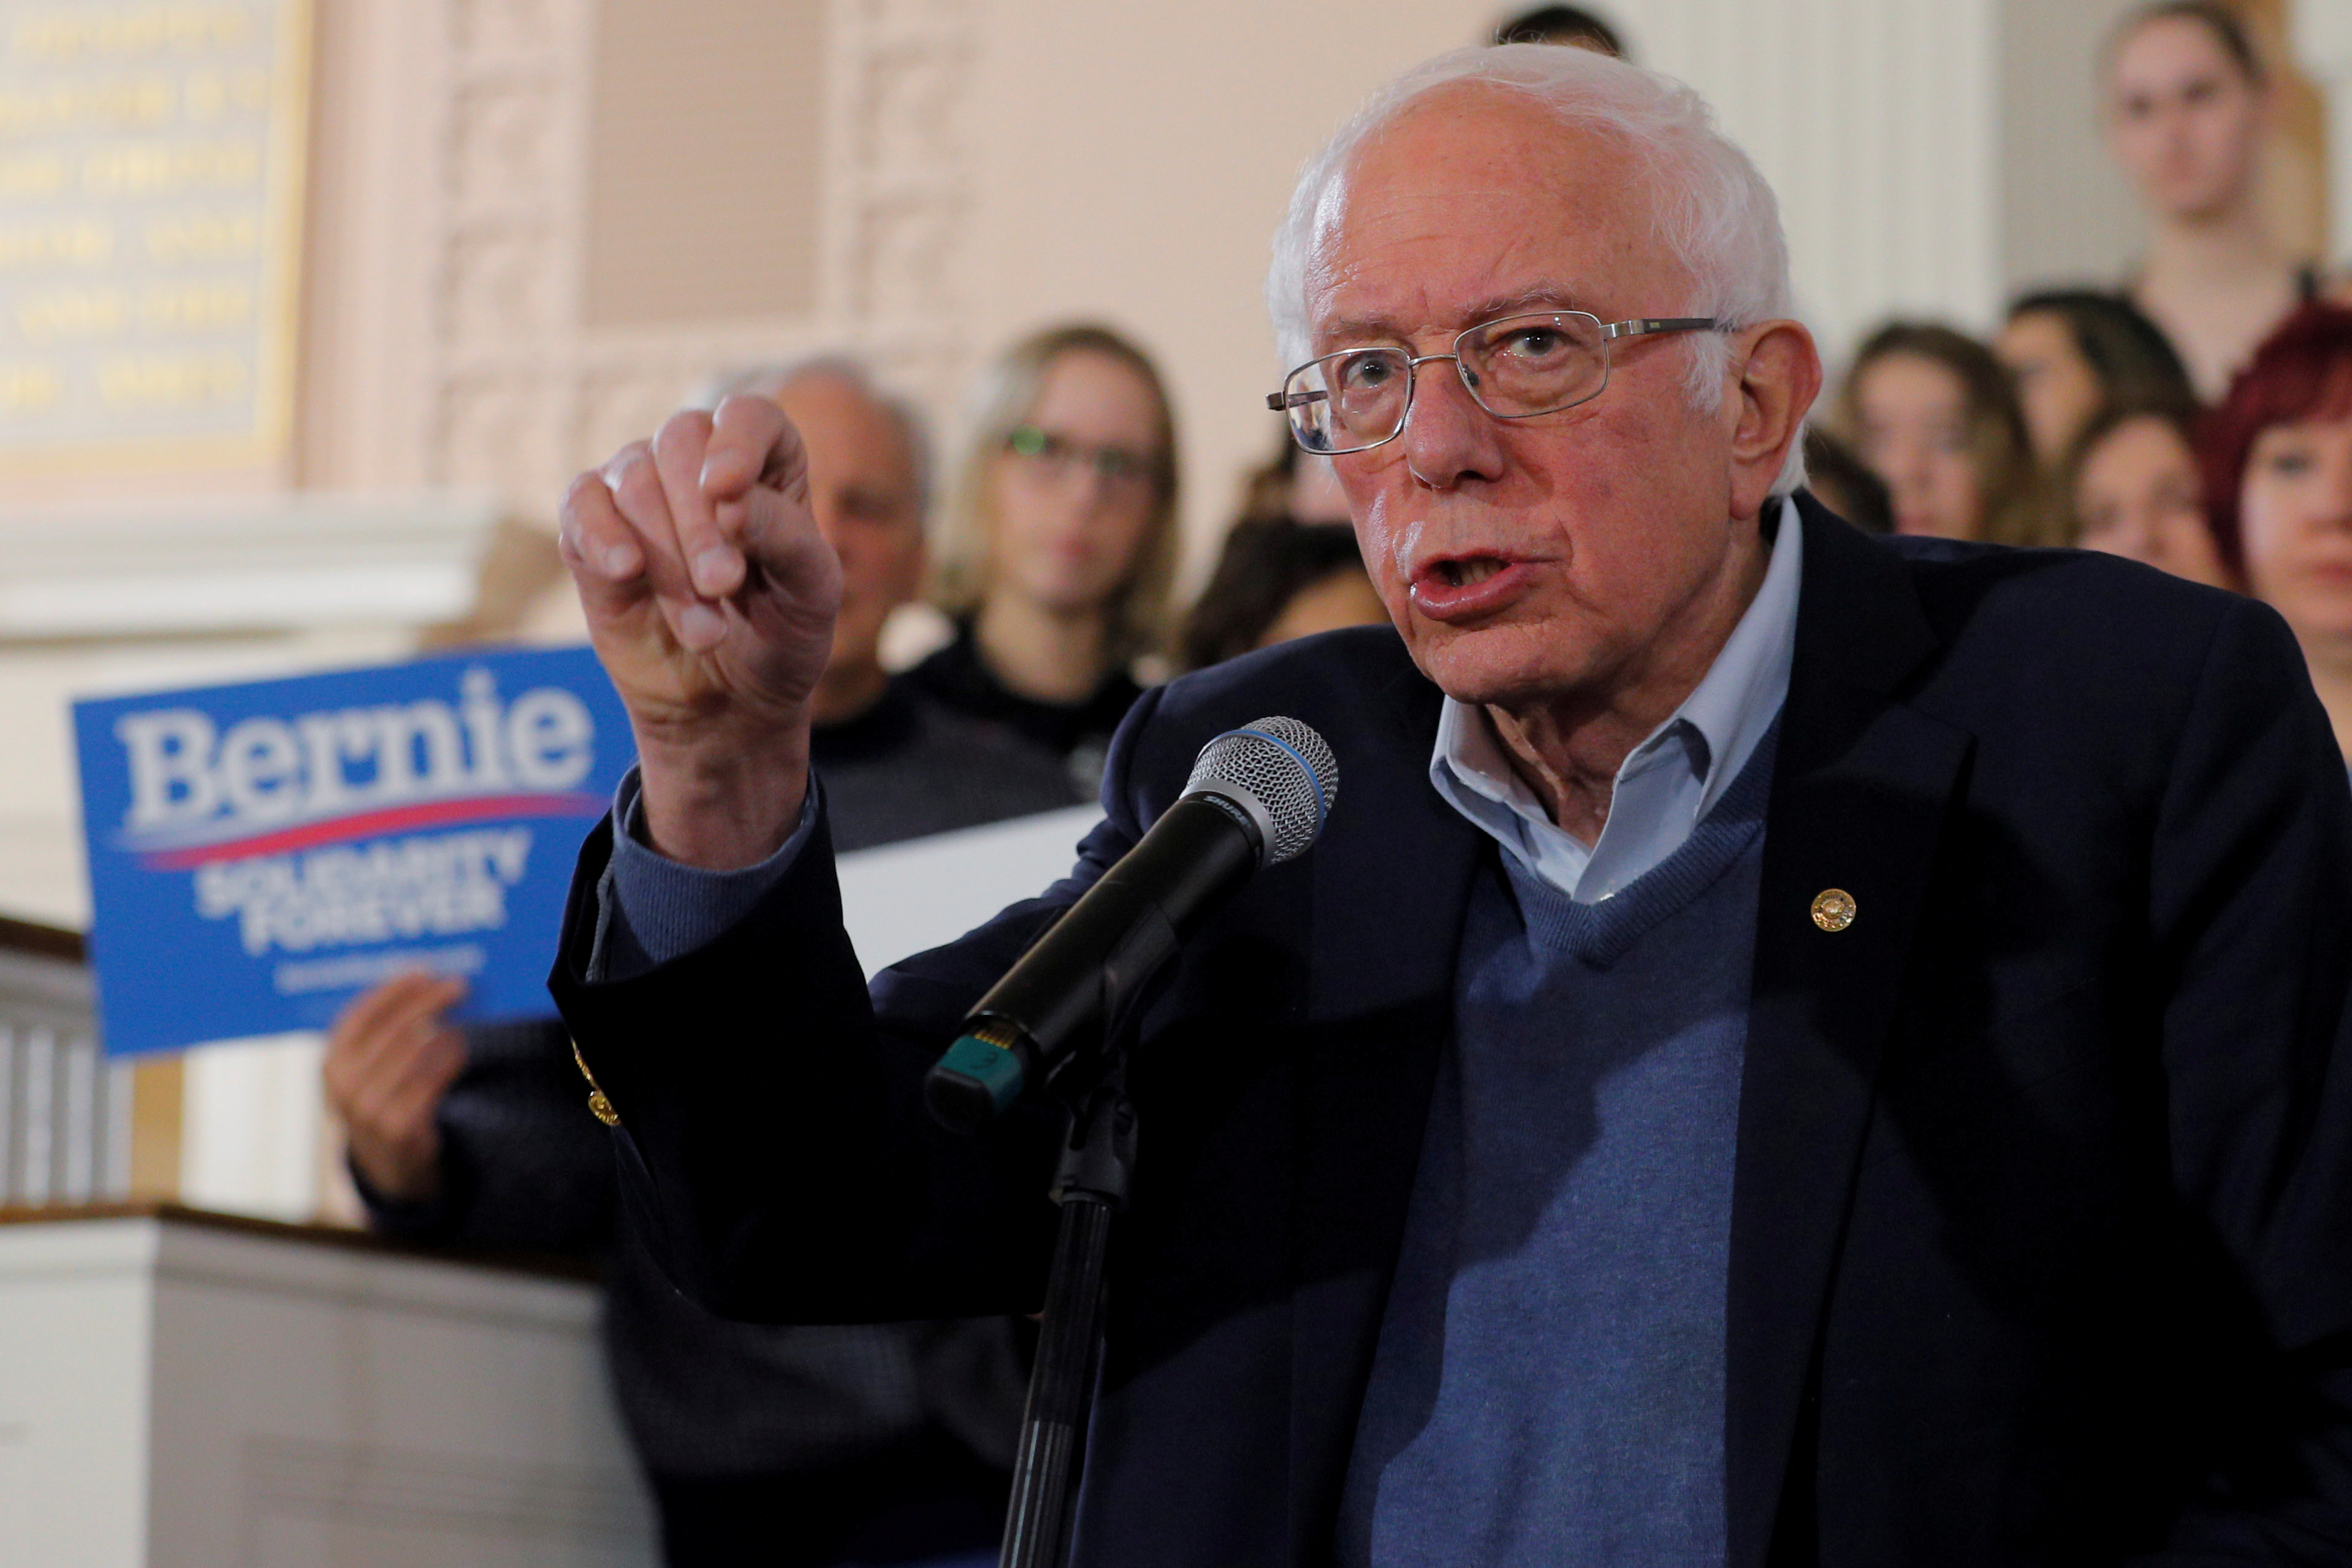 FILE PHOTO: Democratic 2020 U.S. presidential candidate and U.S. Senator Bernie Sanders (I-VT) speaks at a campaign town hall meeting in Portsmouth, New Hampshire, U.S., November 24, 2019. REUTERS/Brian Snyder/File Photo